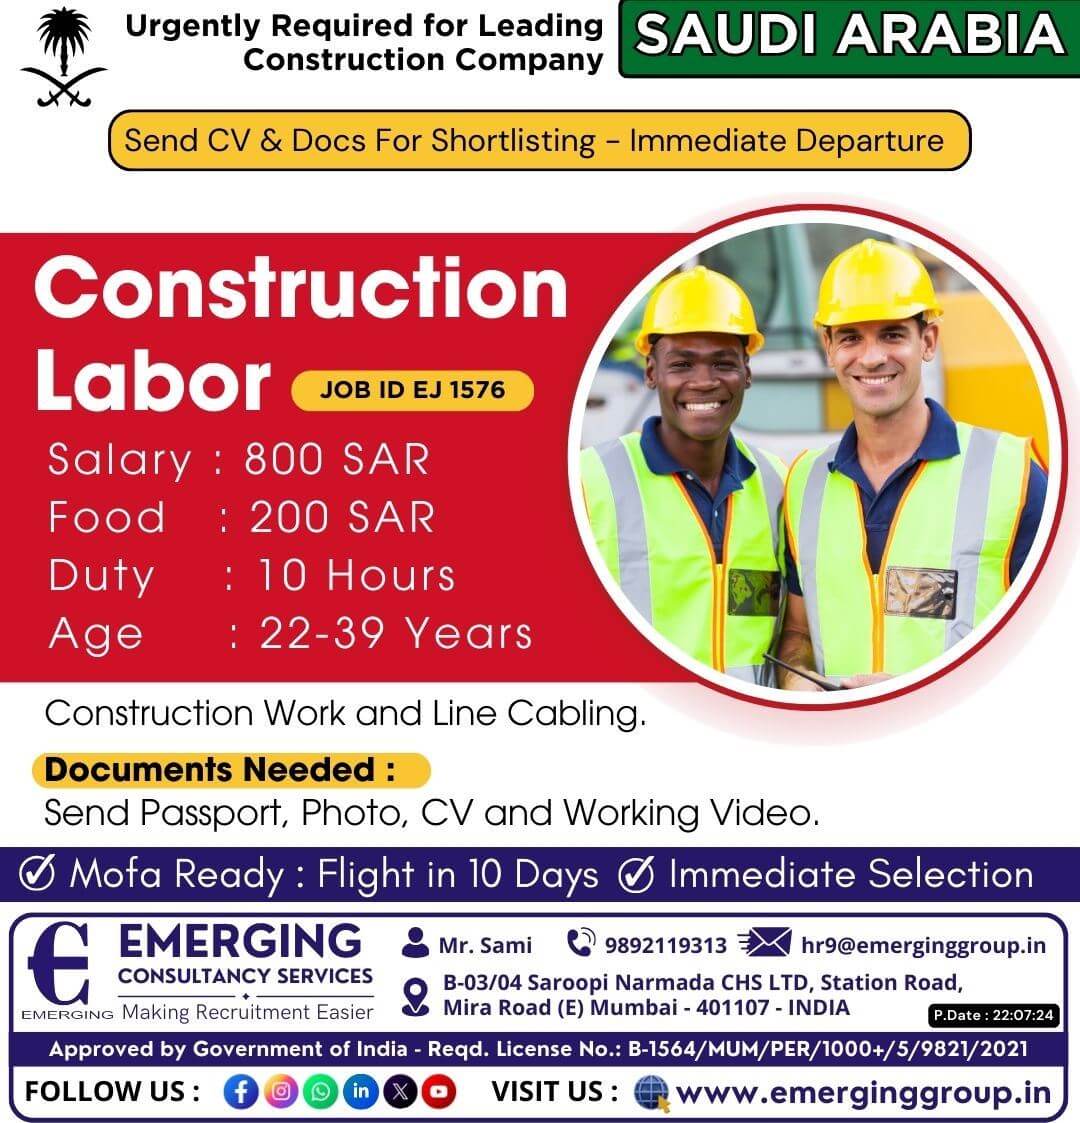 Urgently Required for leading Construction Company in Saudi Arabia